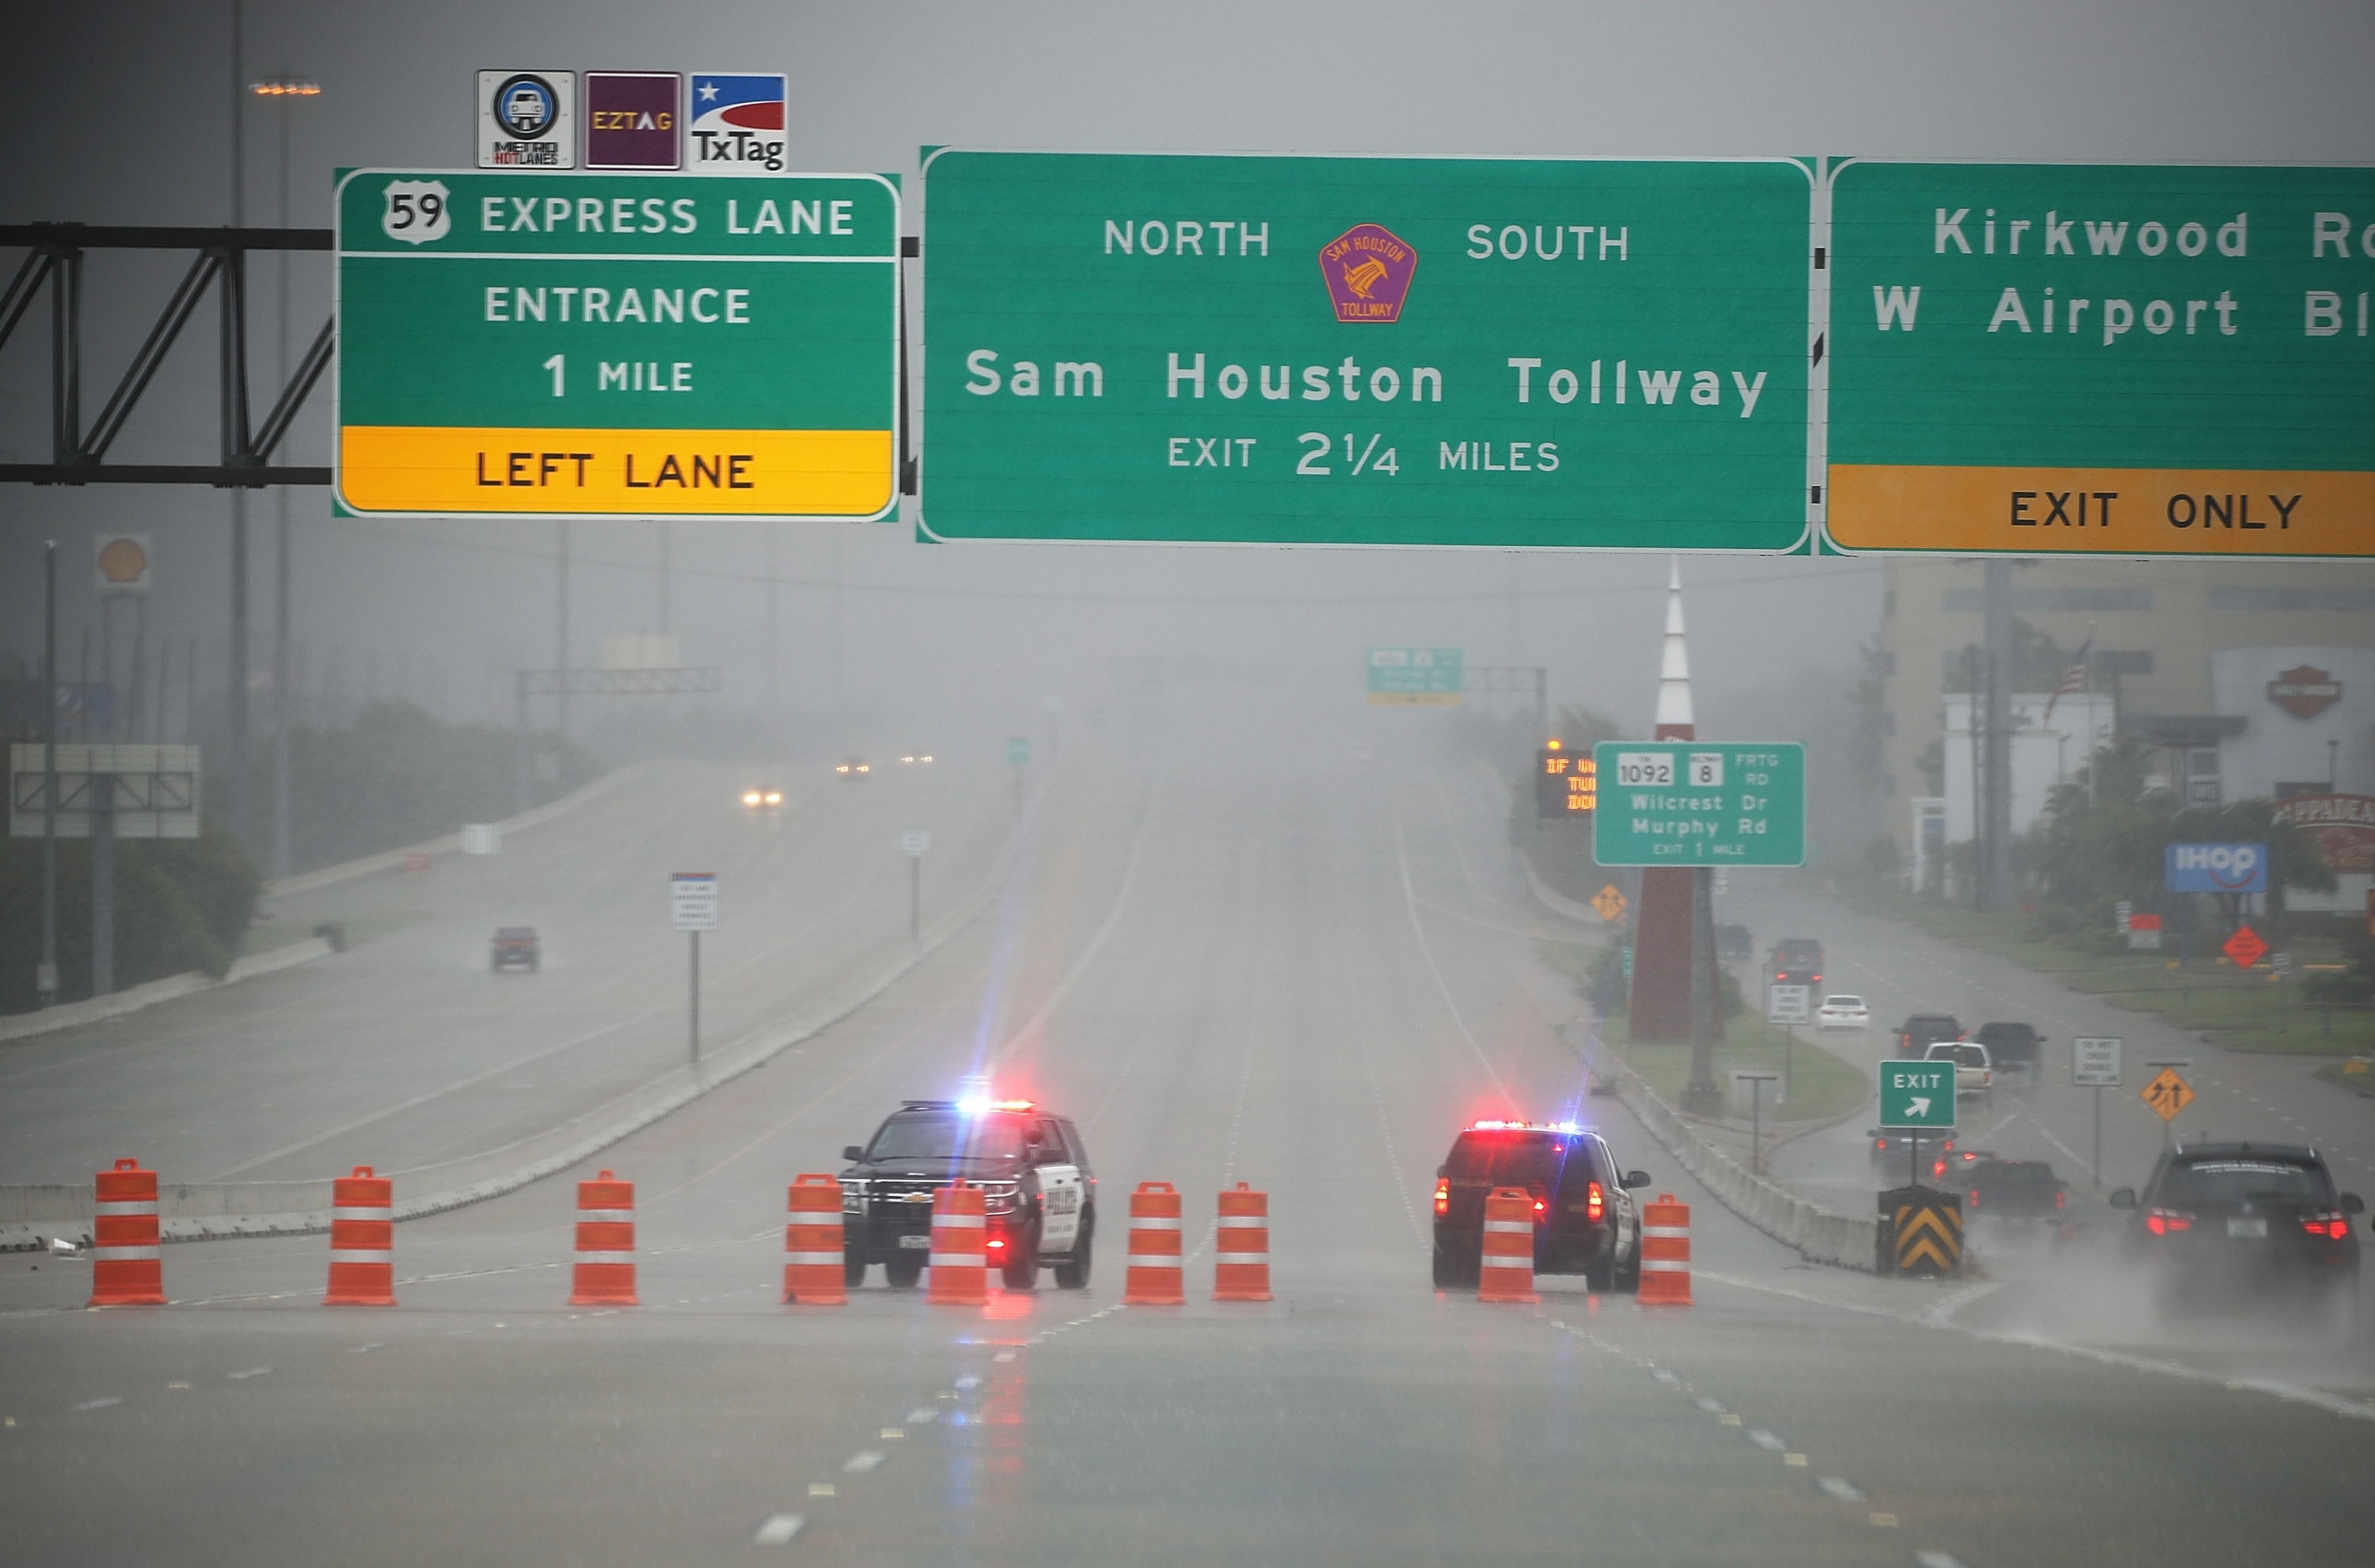 HOUSTON, TX - AUGUST 27:  Police shut down highway 69 due to flooding from Hurricane Harvey on August 27, 2017 in Houston, Texas. Harvey, which made landfall north of Corpus Christi late Friday evening, is expected to dump upwards to 40 inches of rain in Texas over the next couple of days.  (Photo by Joe Raedle/Getty Images)